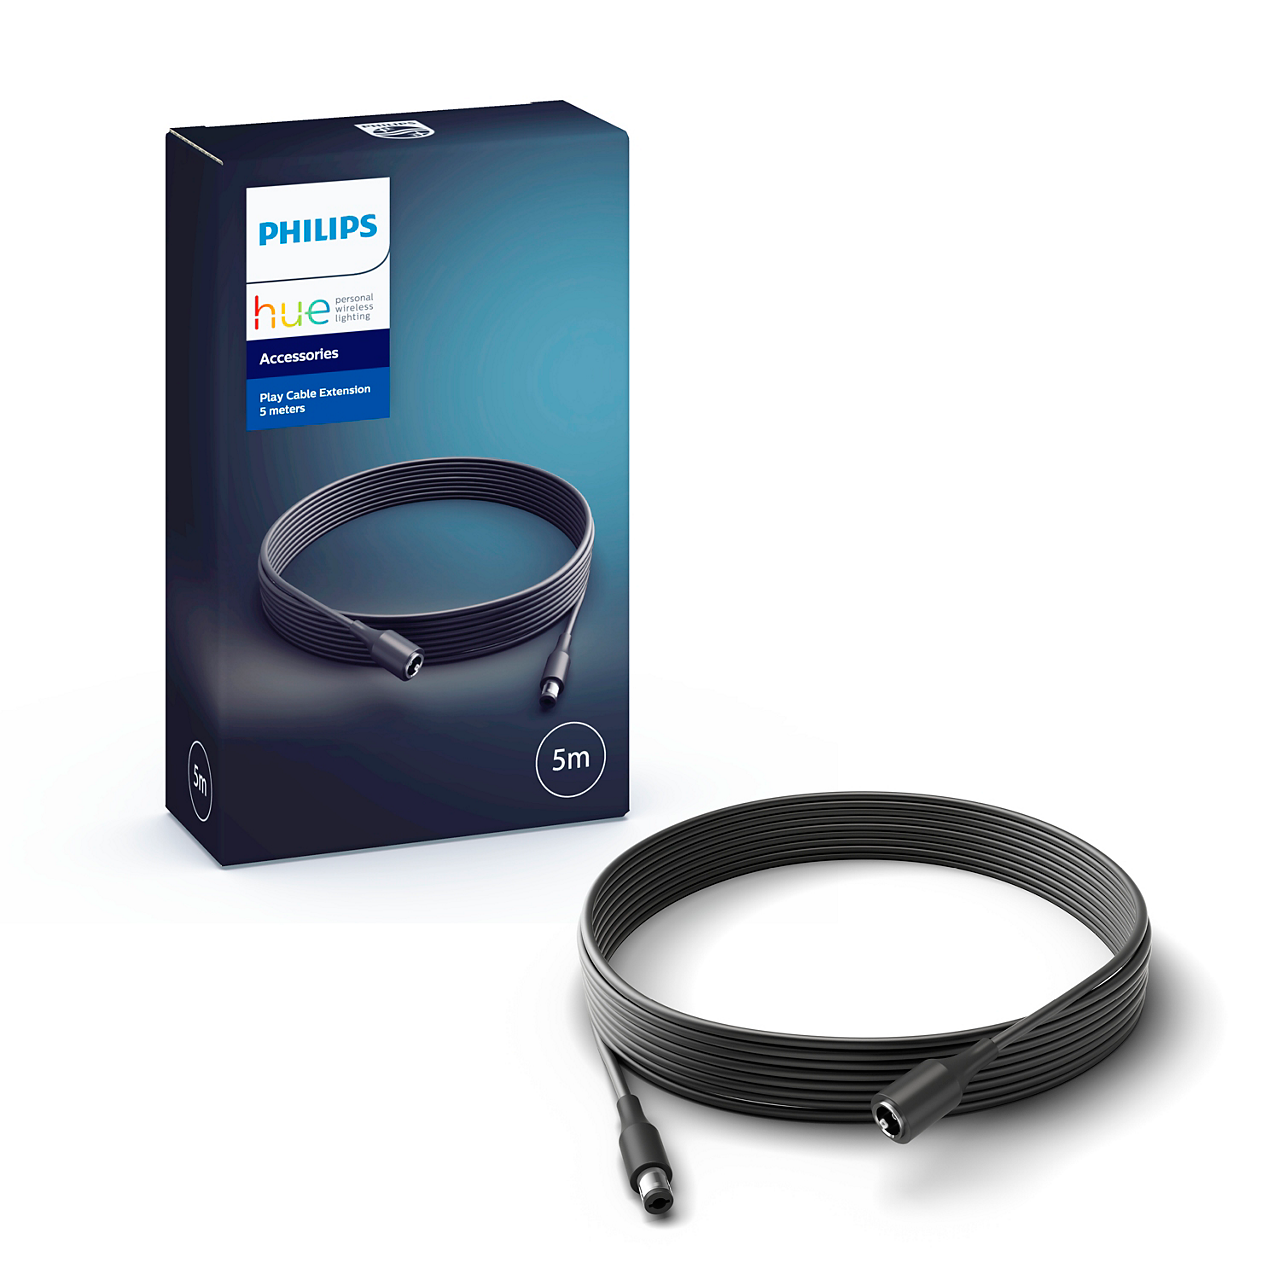 Philips hue play - extension cable 5m